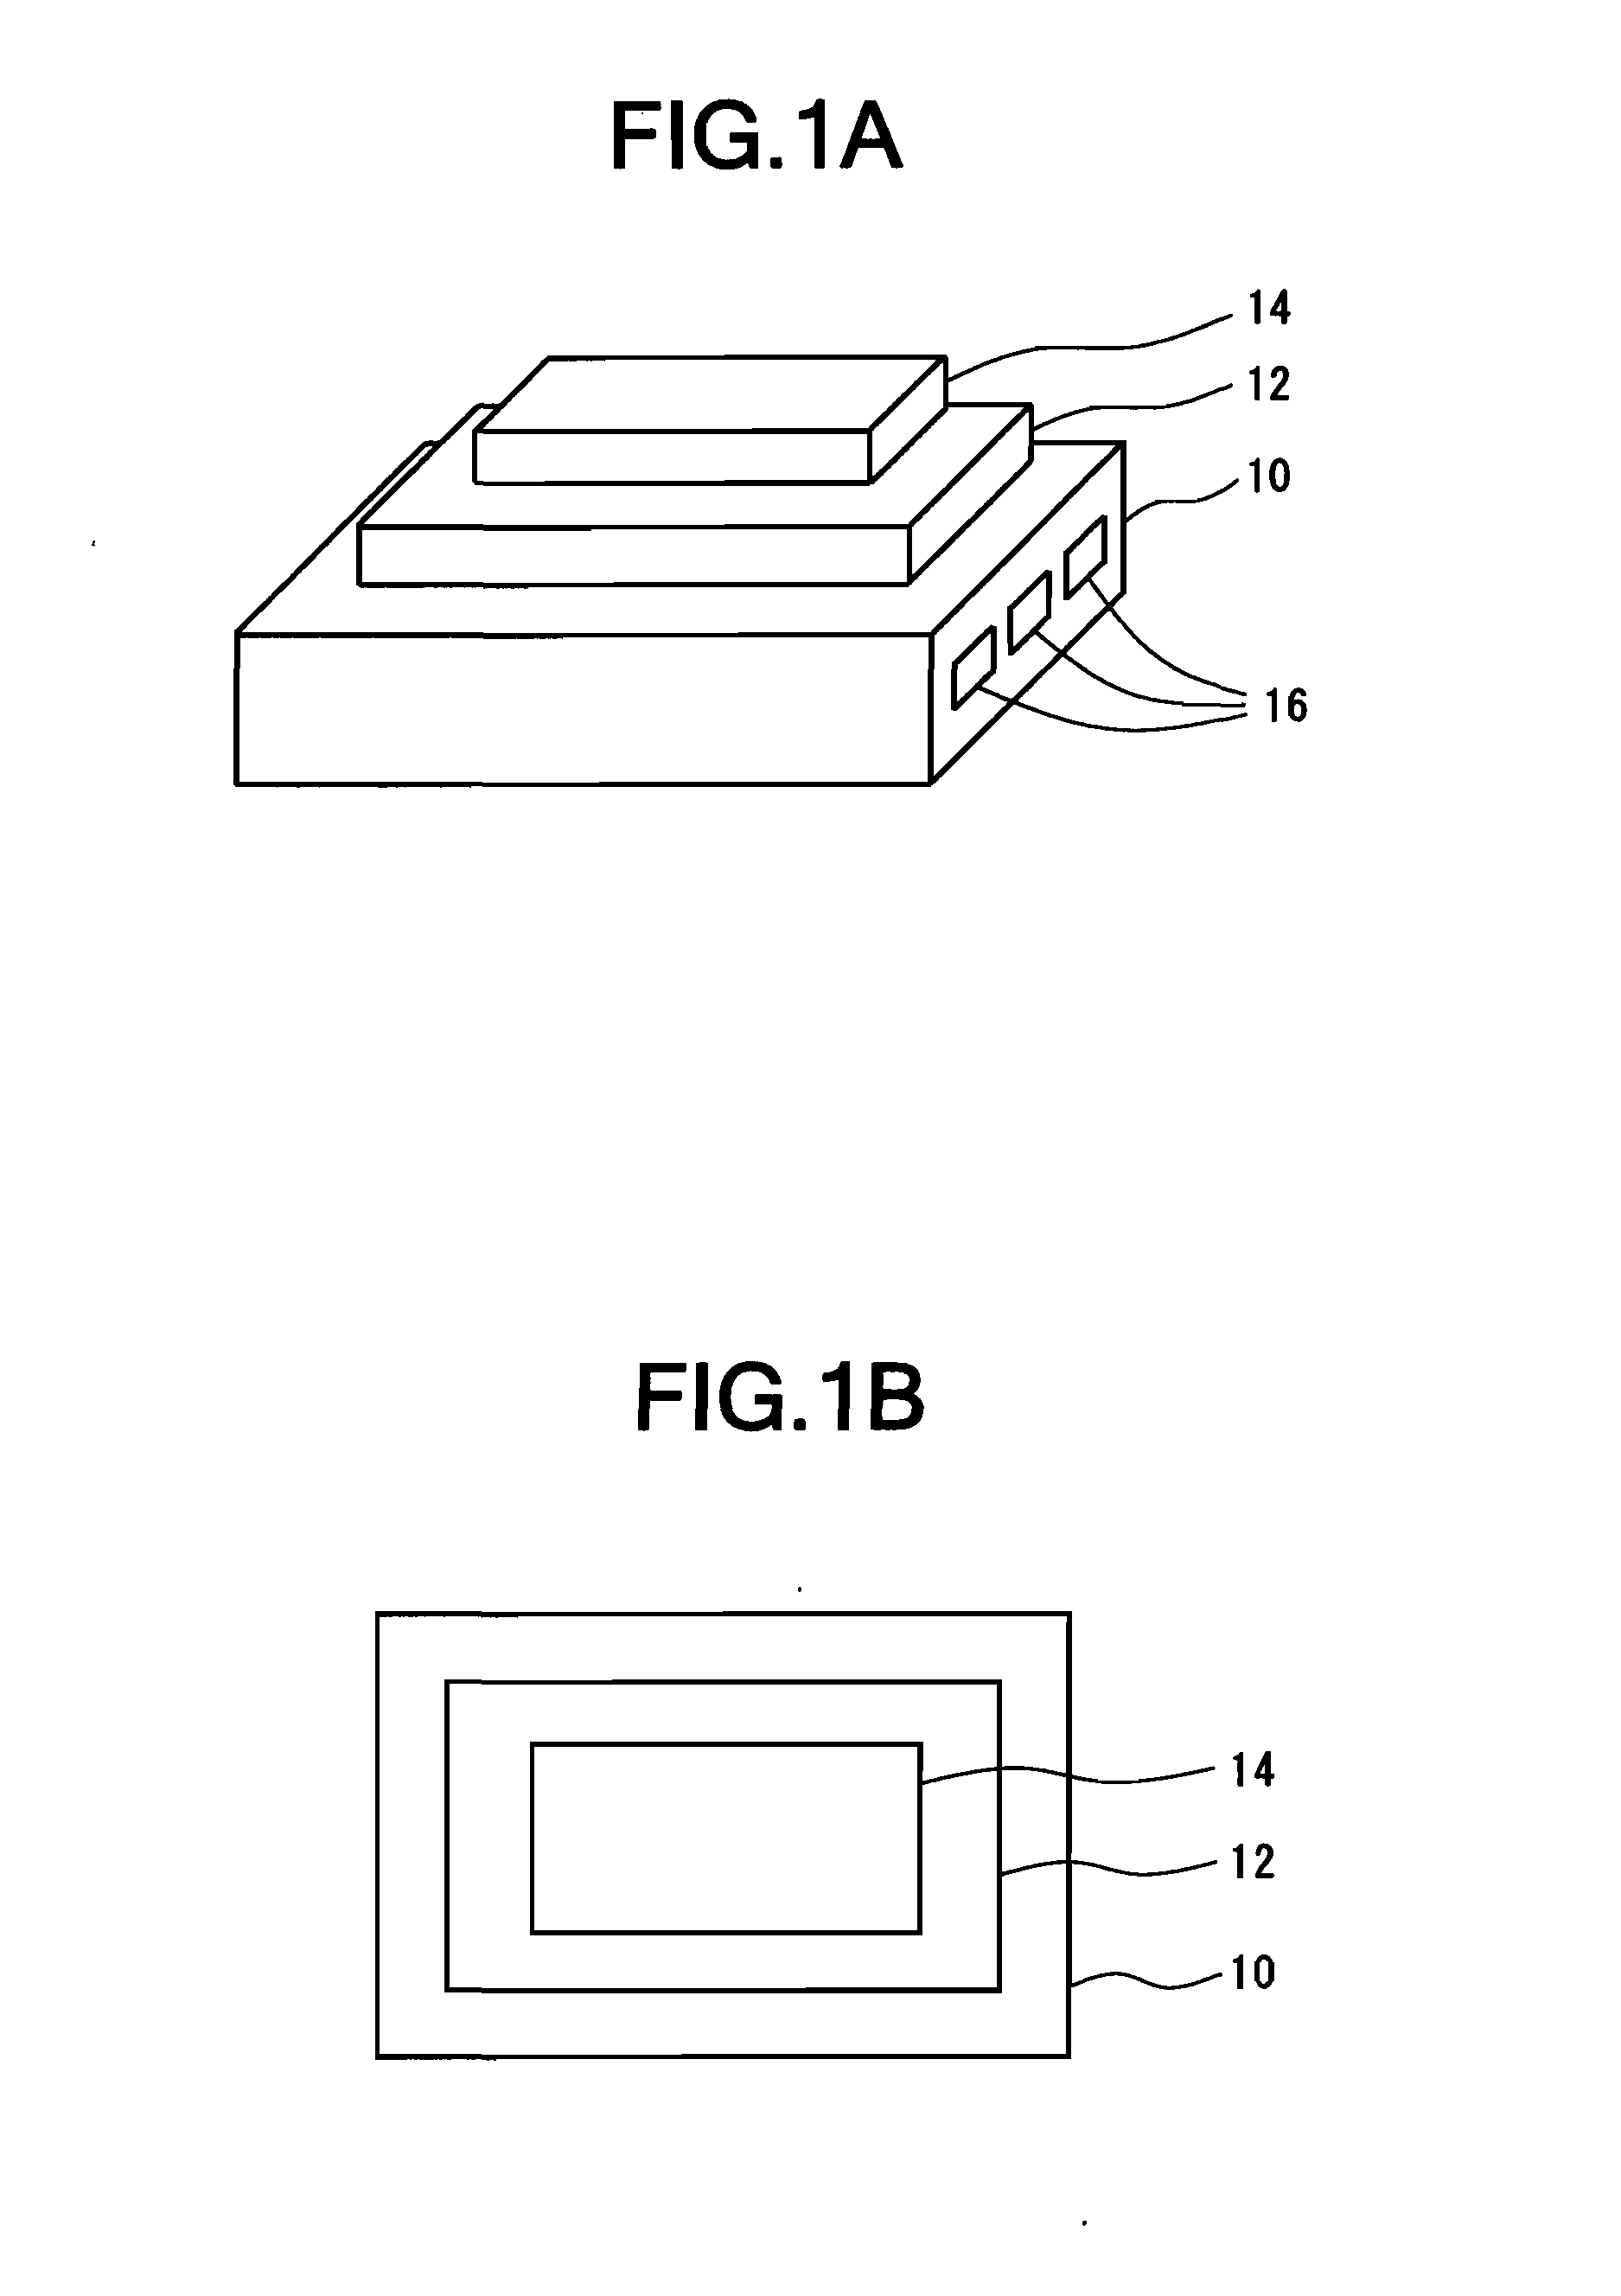 Metal/ceramic bonding substrate and method for producing same